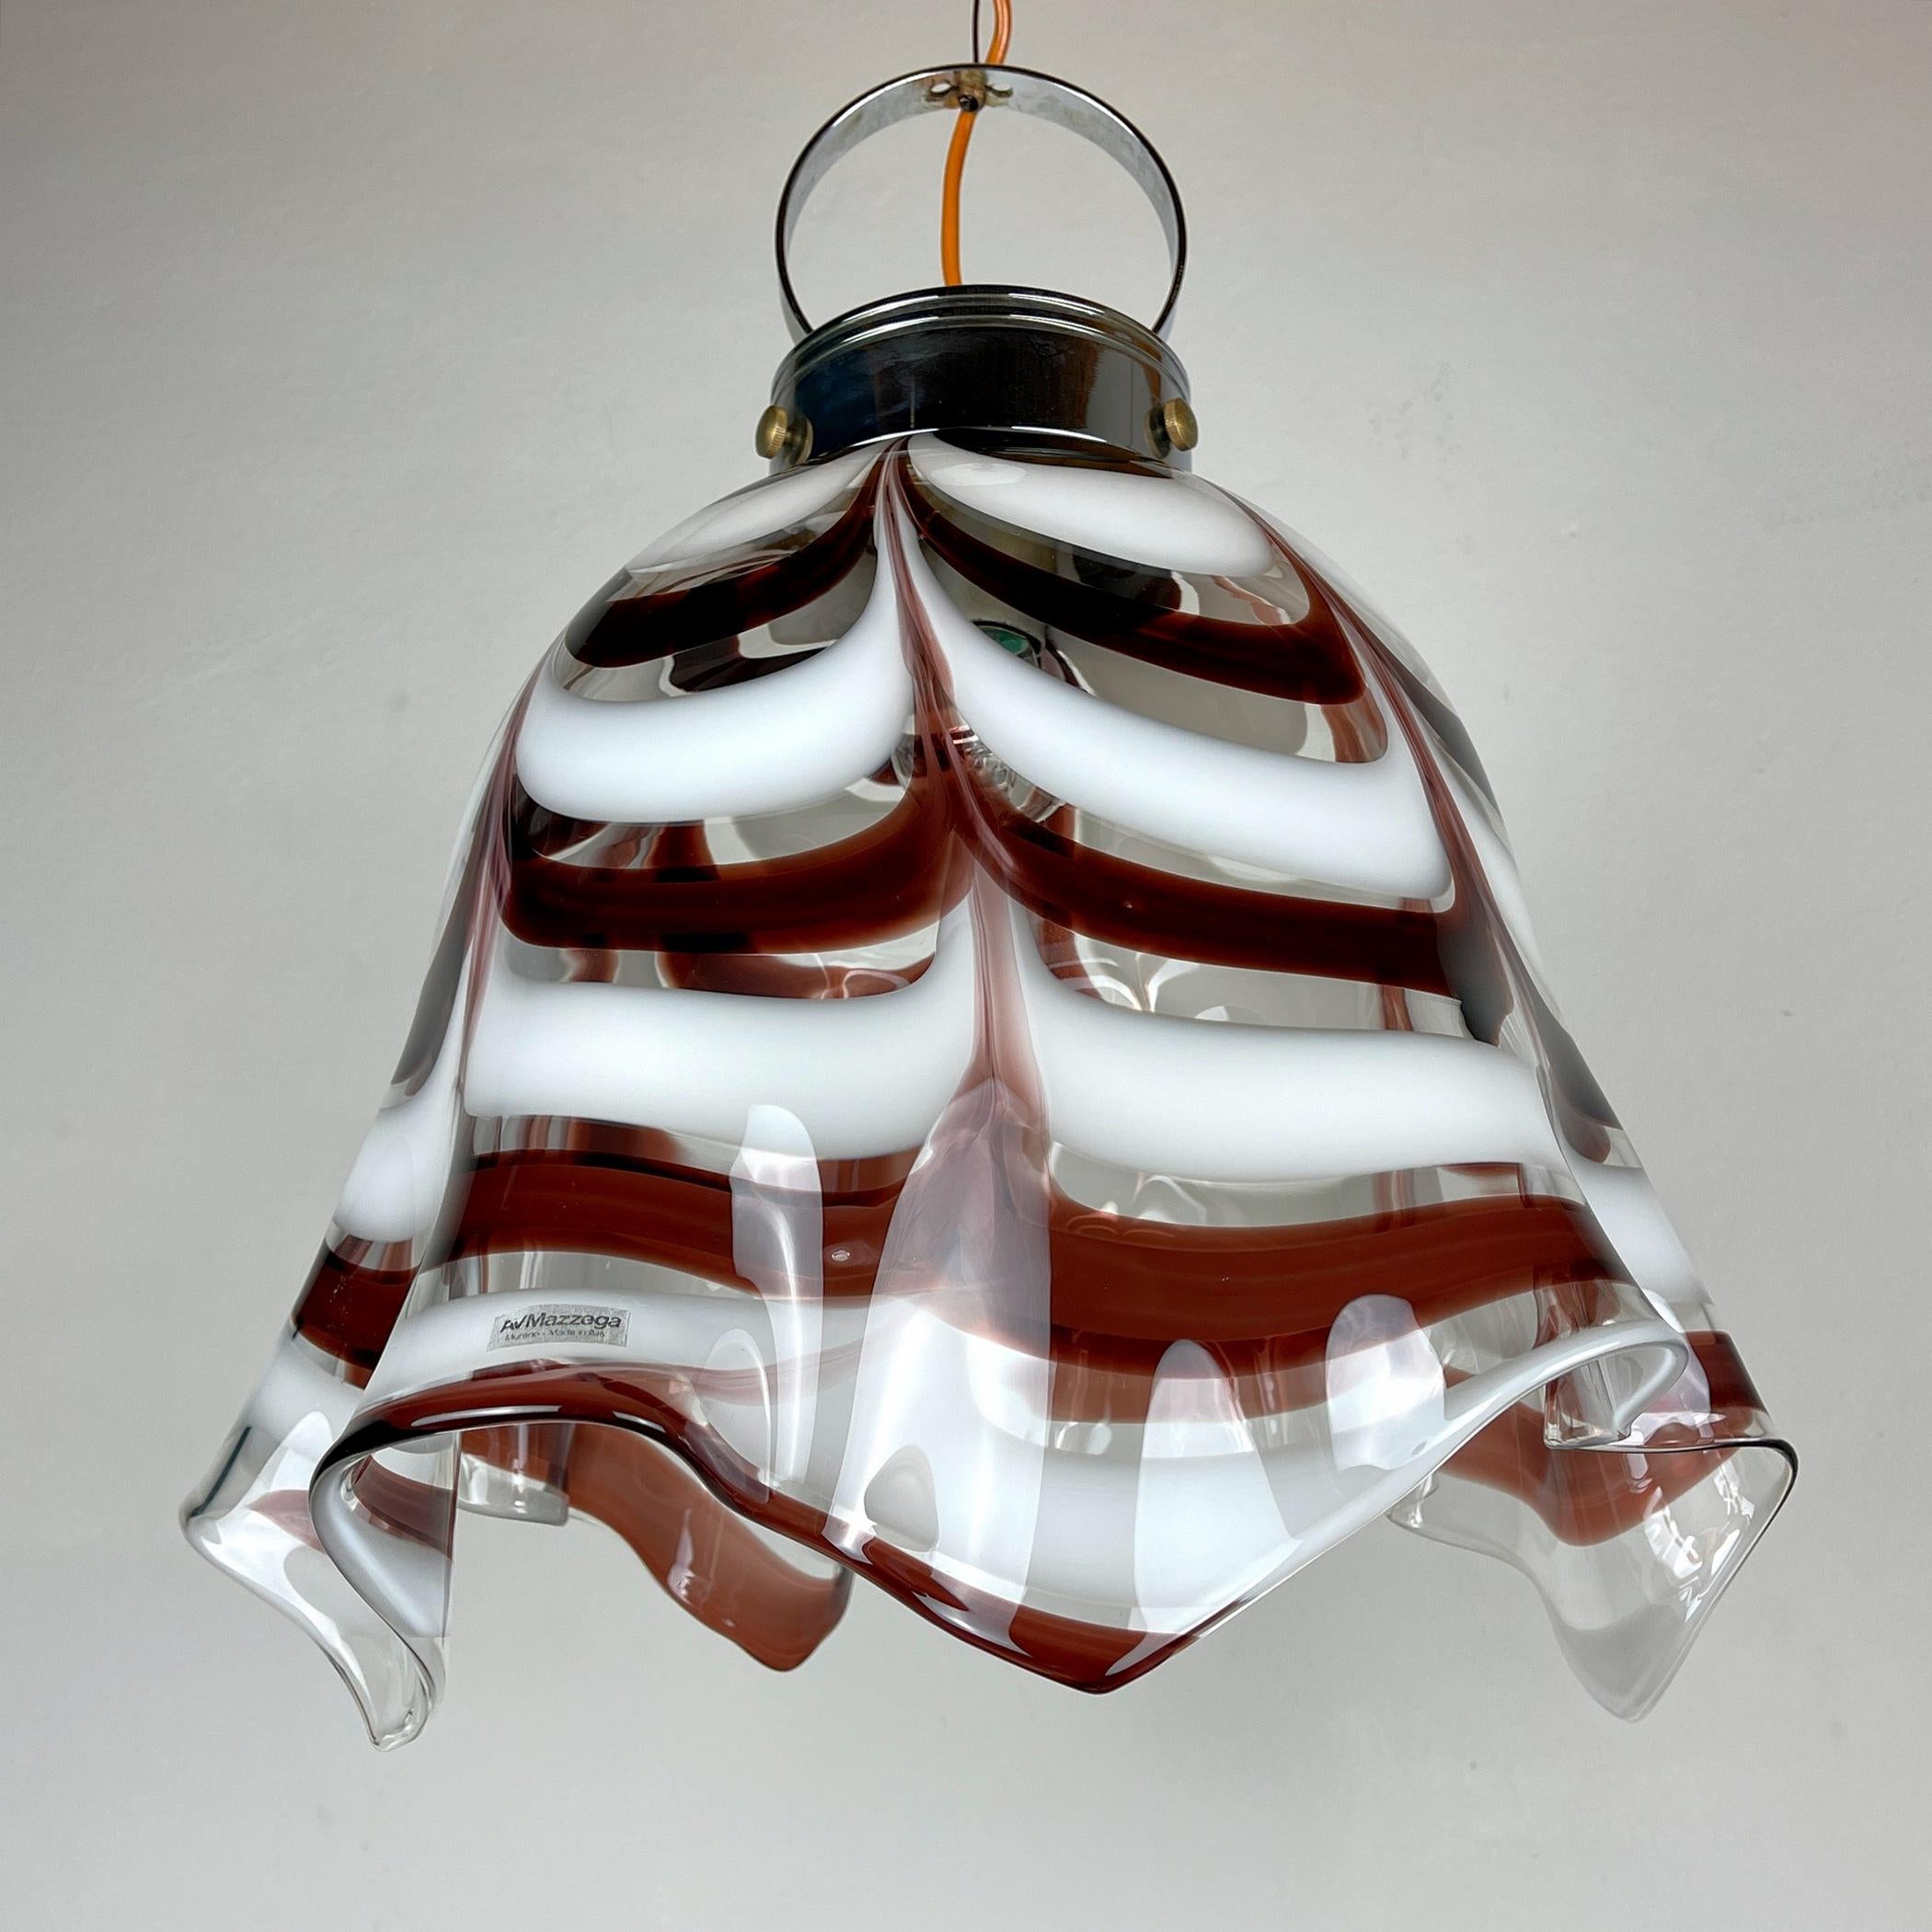 Original impressive Murano pendant lamp, produced by AV Mazzega in Italy, in the 1970s. The shade of this model, also known as 'Fazzoletto', resembles a large handkerchief. The shade is molded by hand. The lamp also displays some true Murano